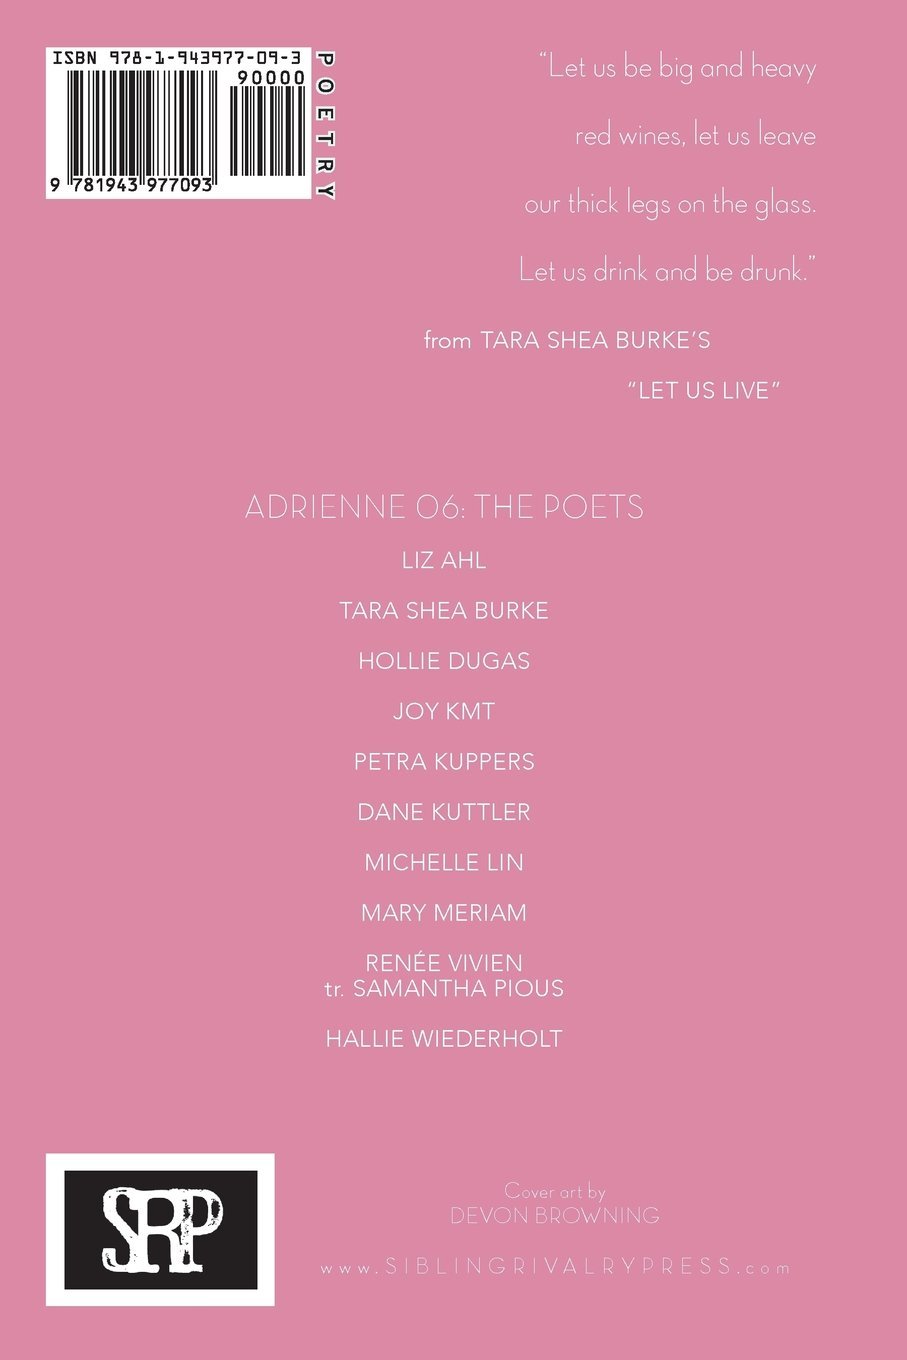 Adrienne Issue 06: A Poetry Journal of Queer Women